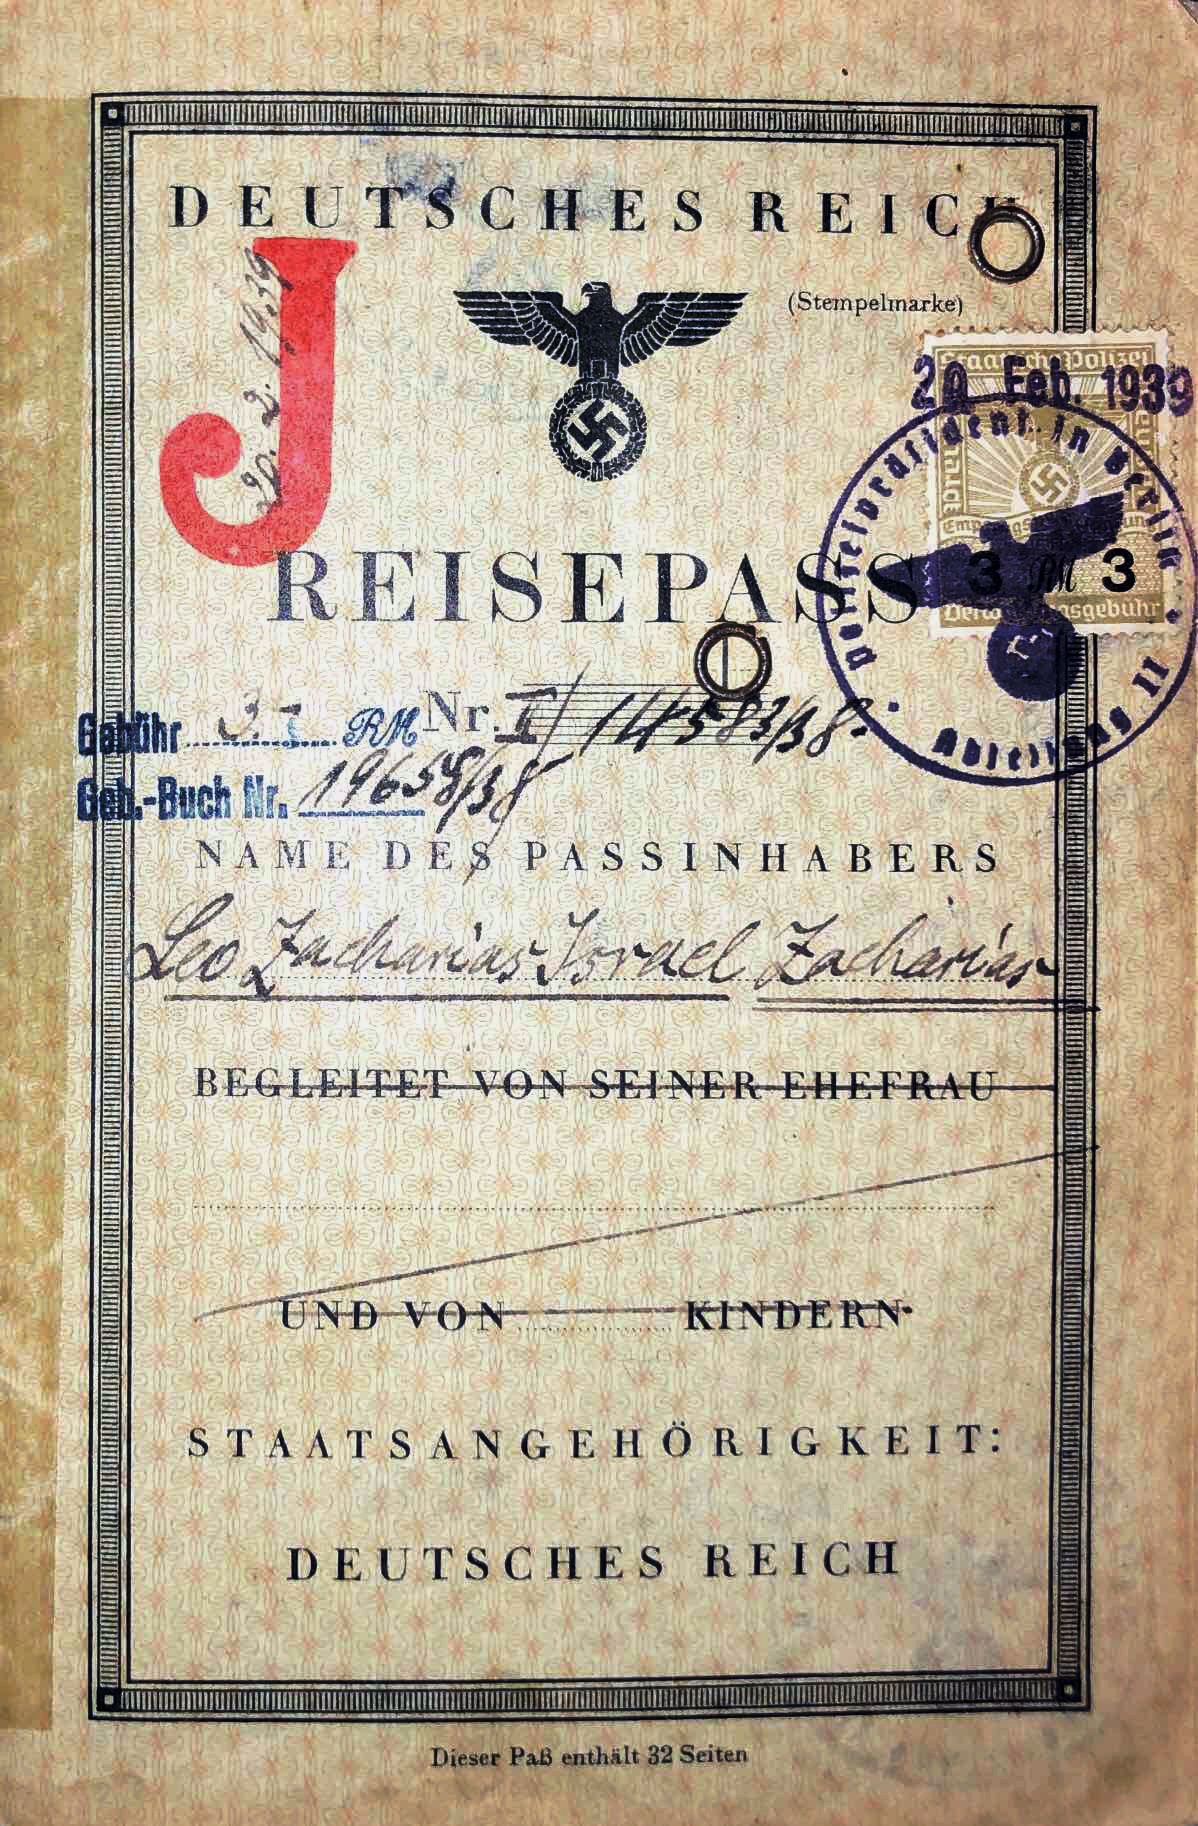 A German passport with a large red "J" and Nazi stamps.